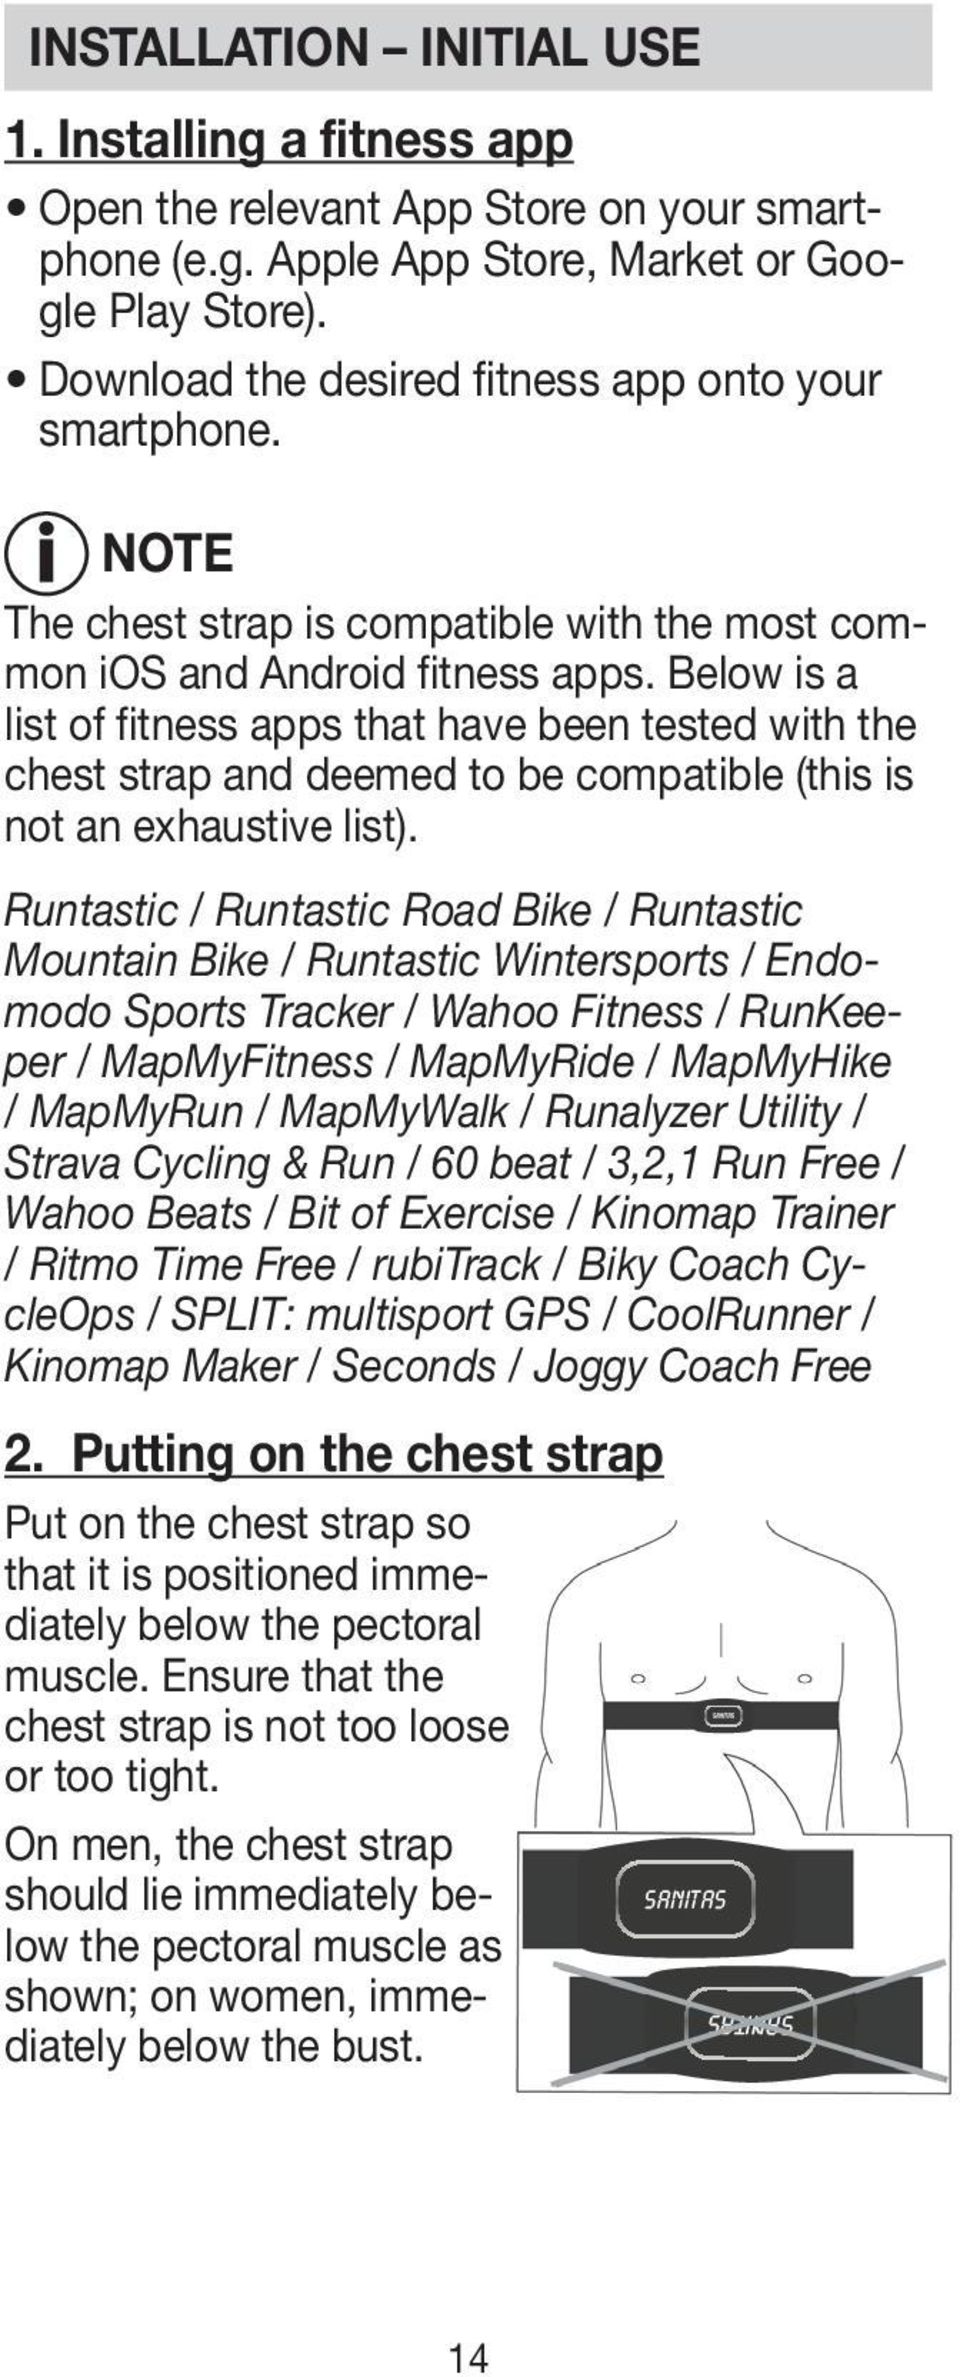 Below is a list of fitness apps that have been tested with the chest strap and deemed to be compatible (this is not an exhaustive list).